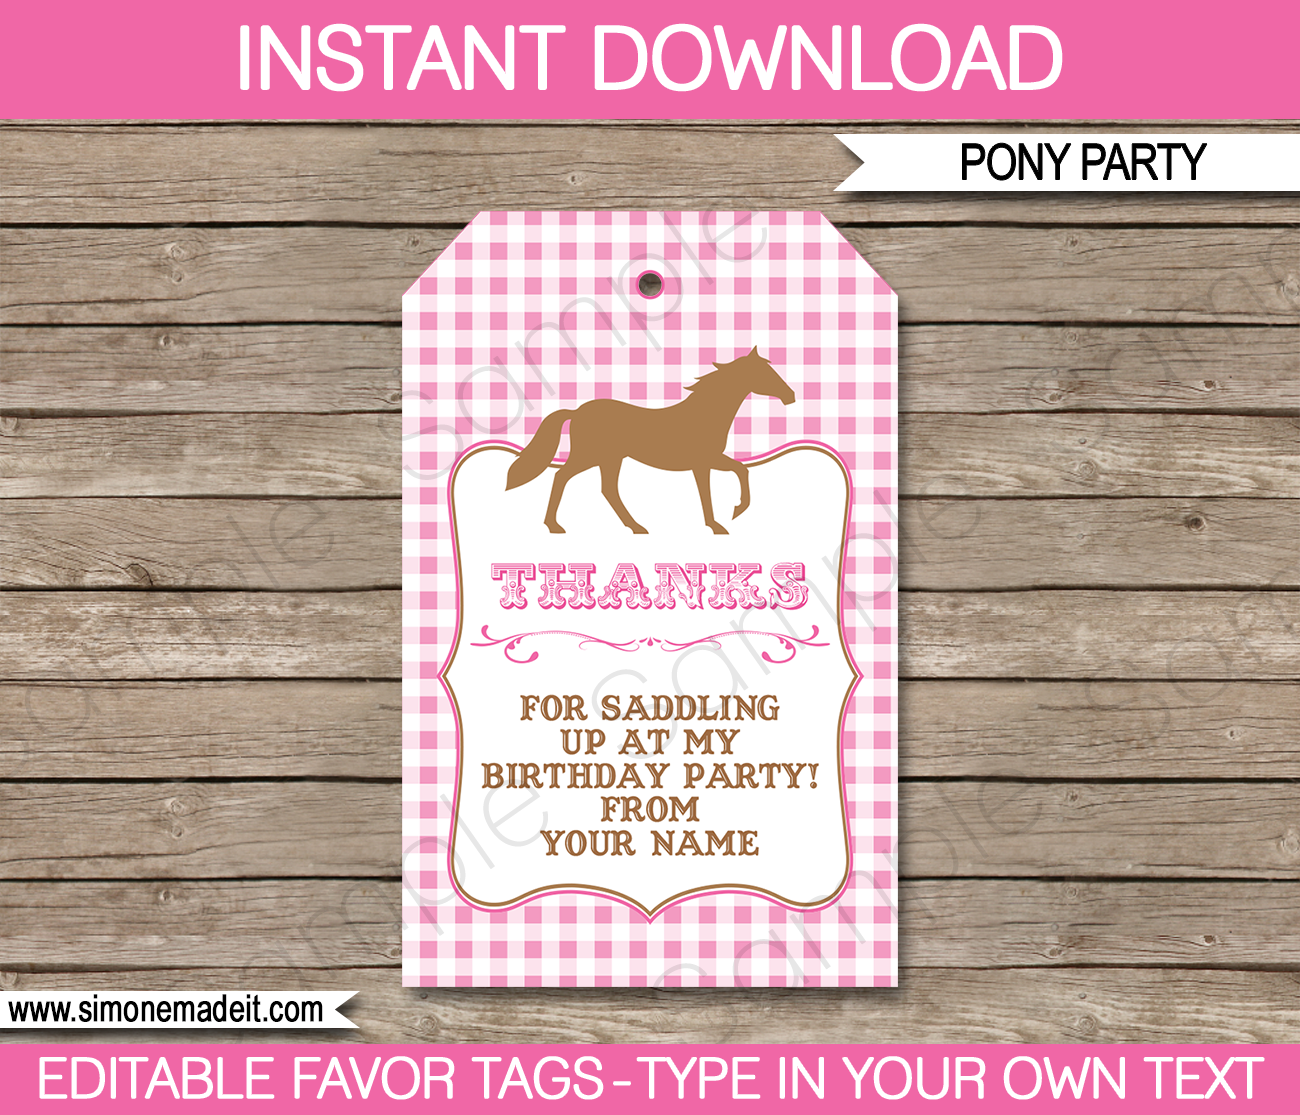 Pony Party Favor Tags | Thank You Tags | Horse Party | Birthday Party | Editable DIY Template | $3.00 INSTANT DOWNLOAD via SIMONEmadeit.com